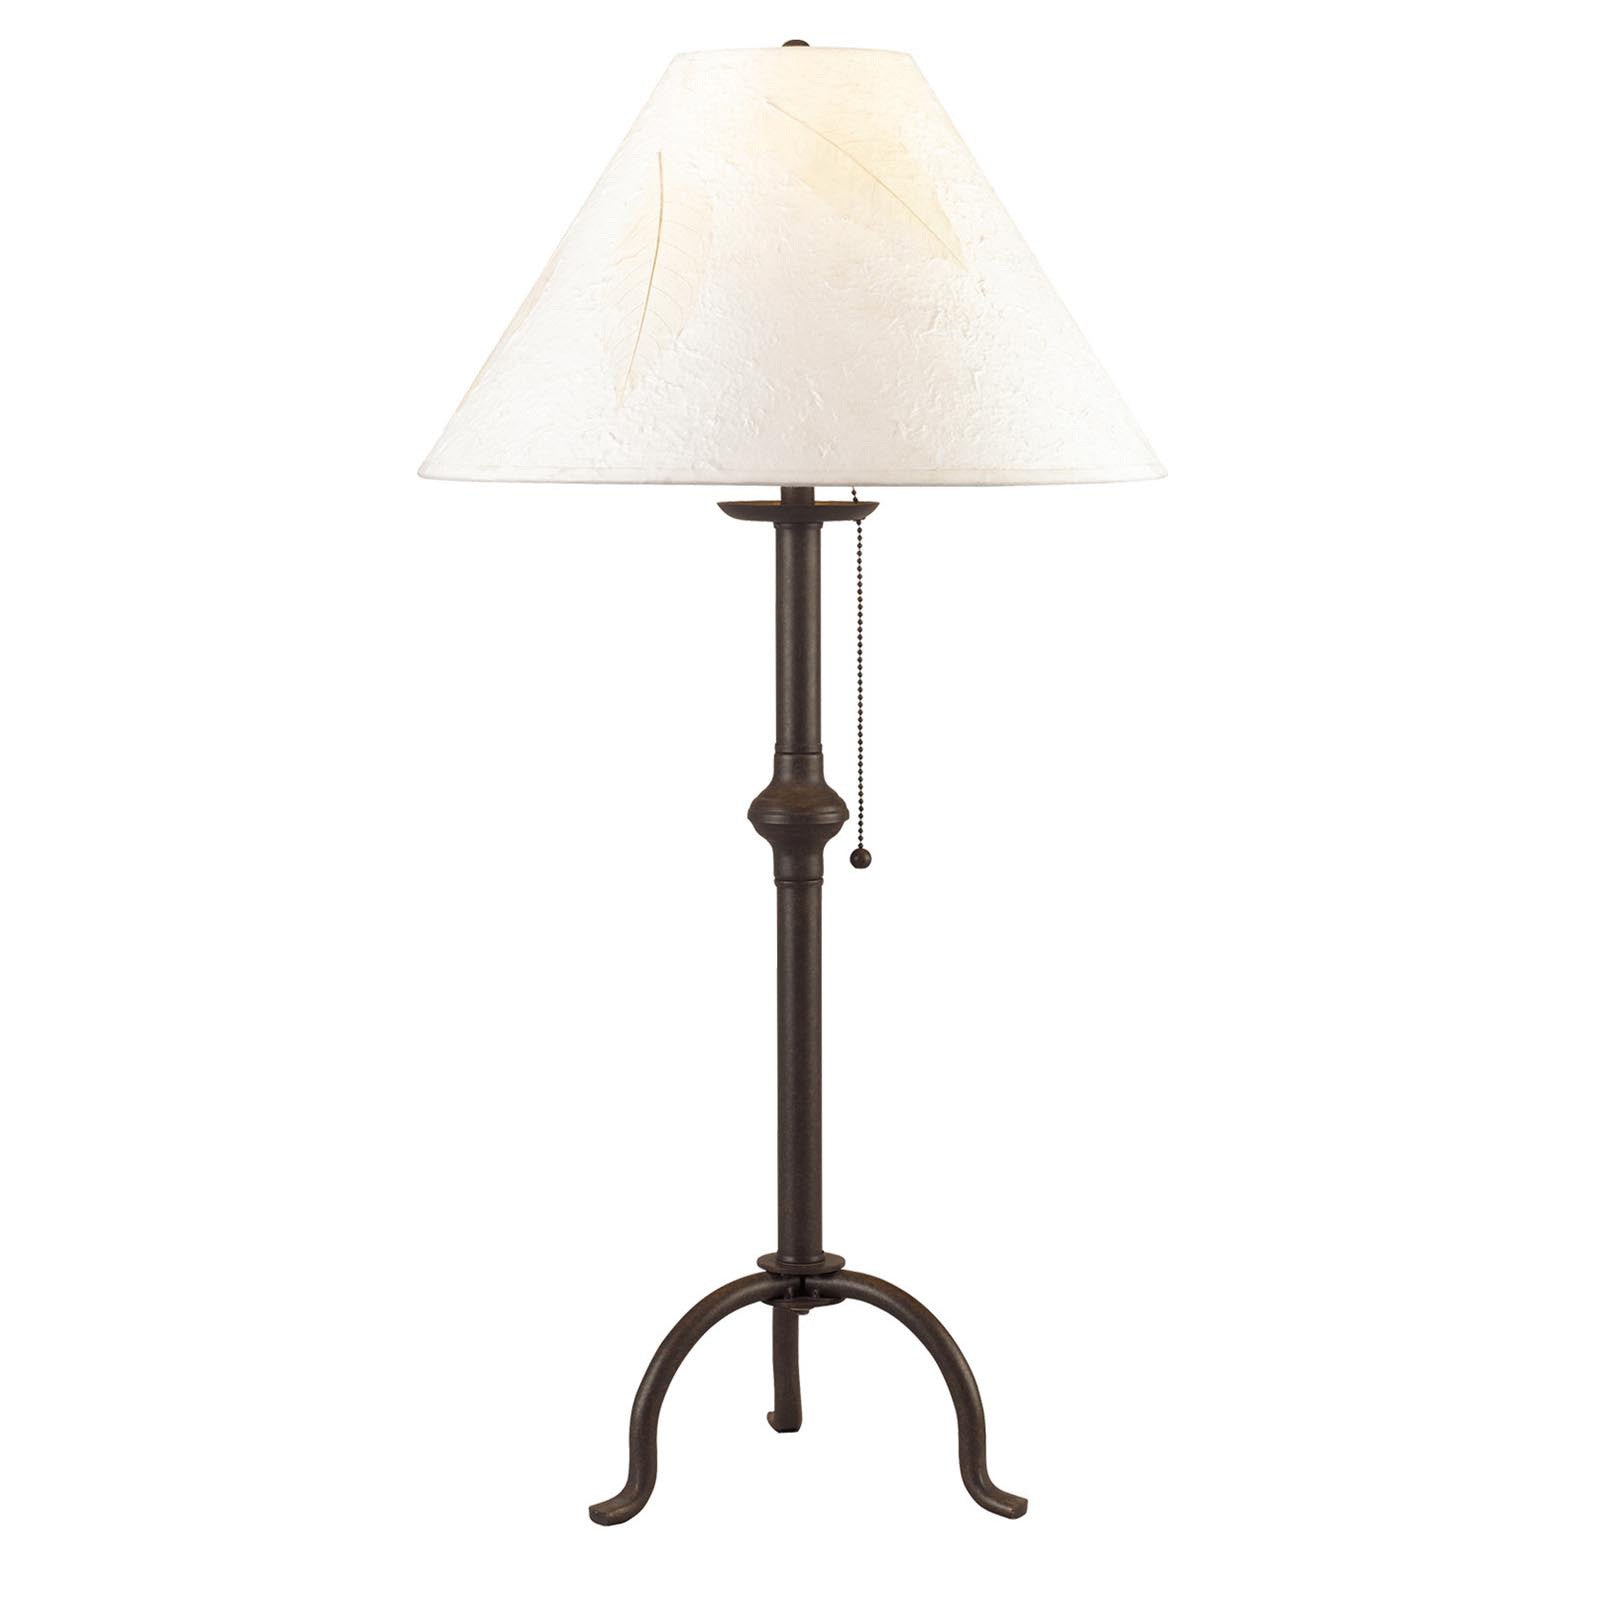 32" Black Metal Table Lamp With Off White Empire Shade